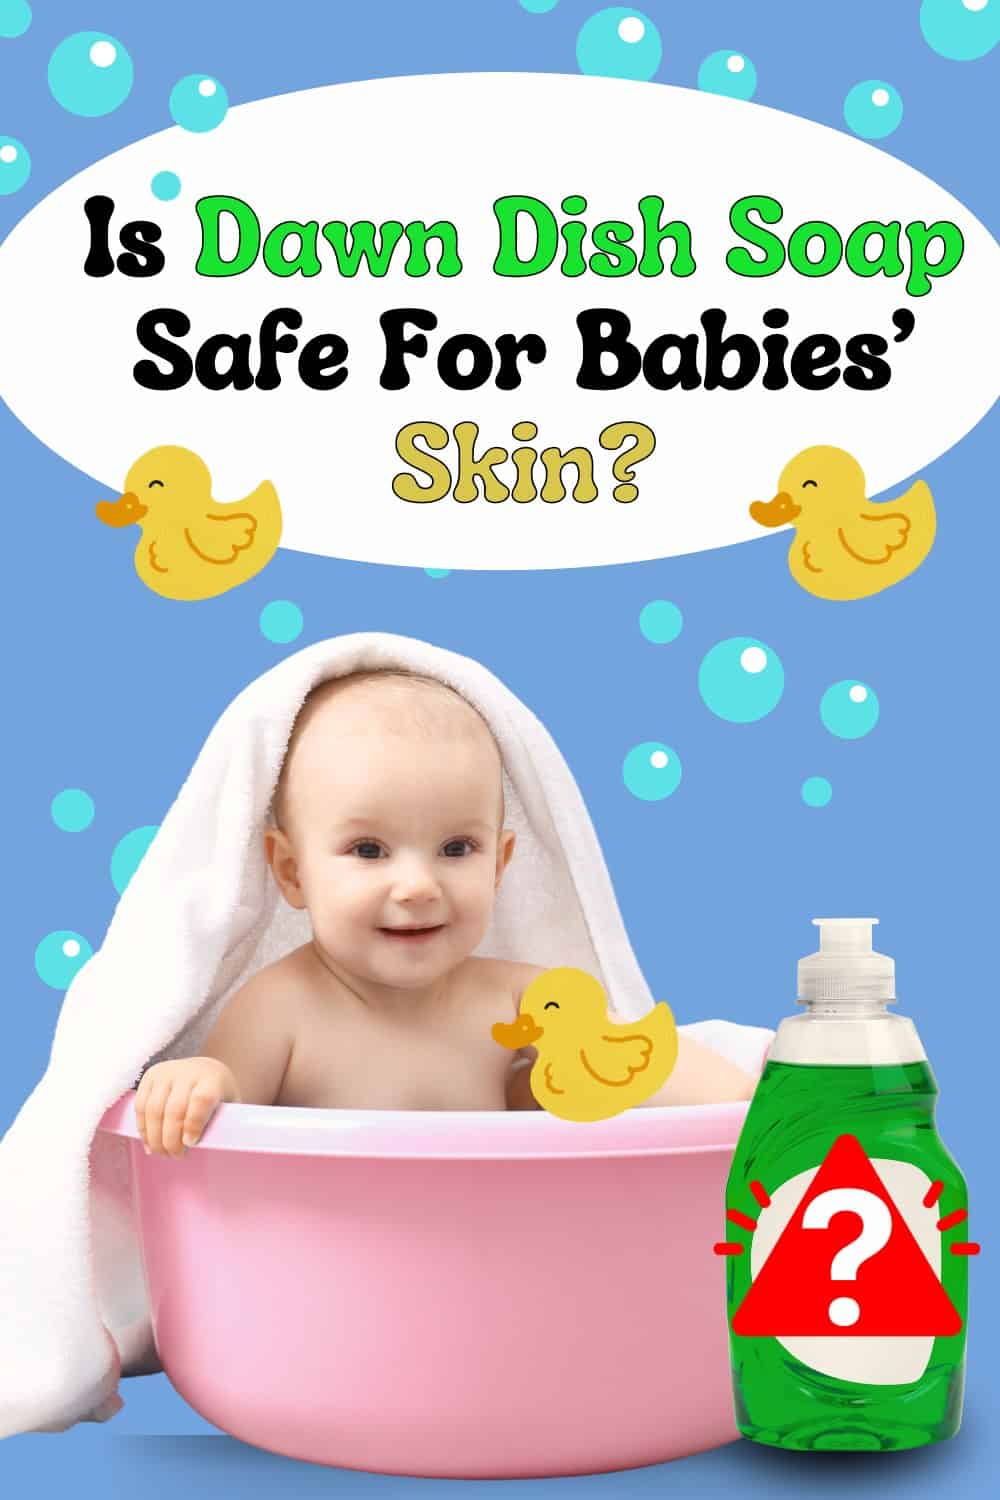 No, Dawn dish soap is not safe for babies skin